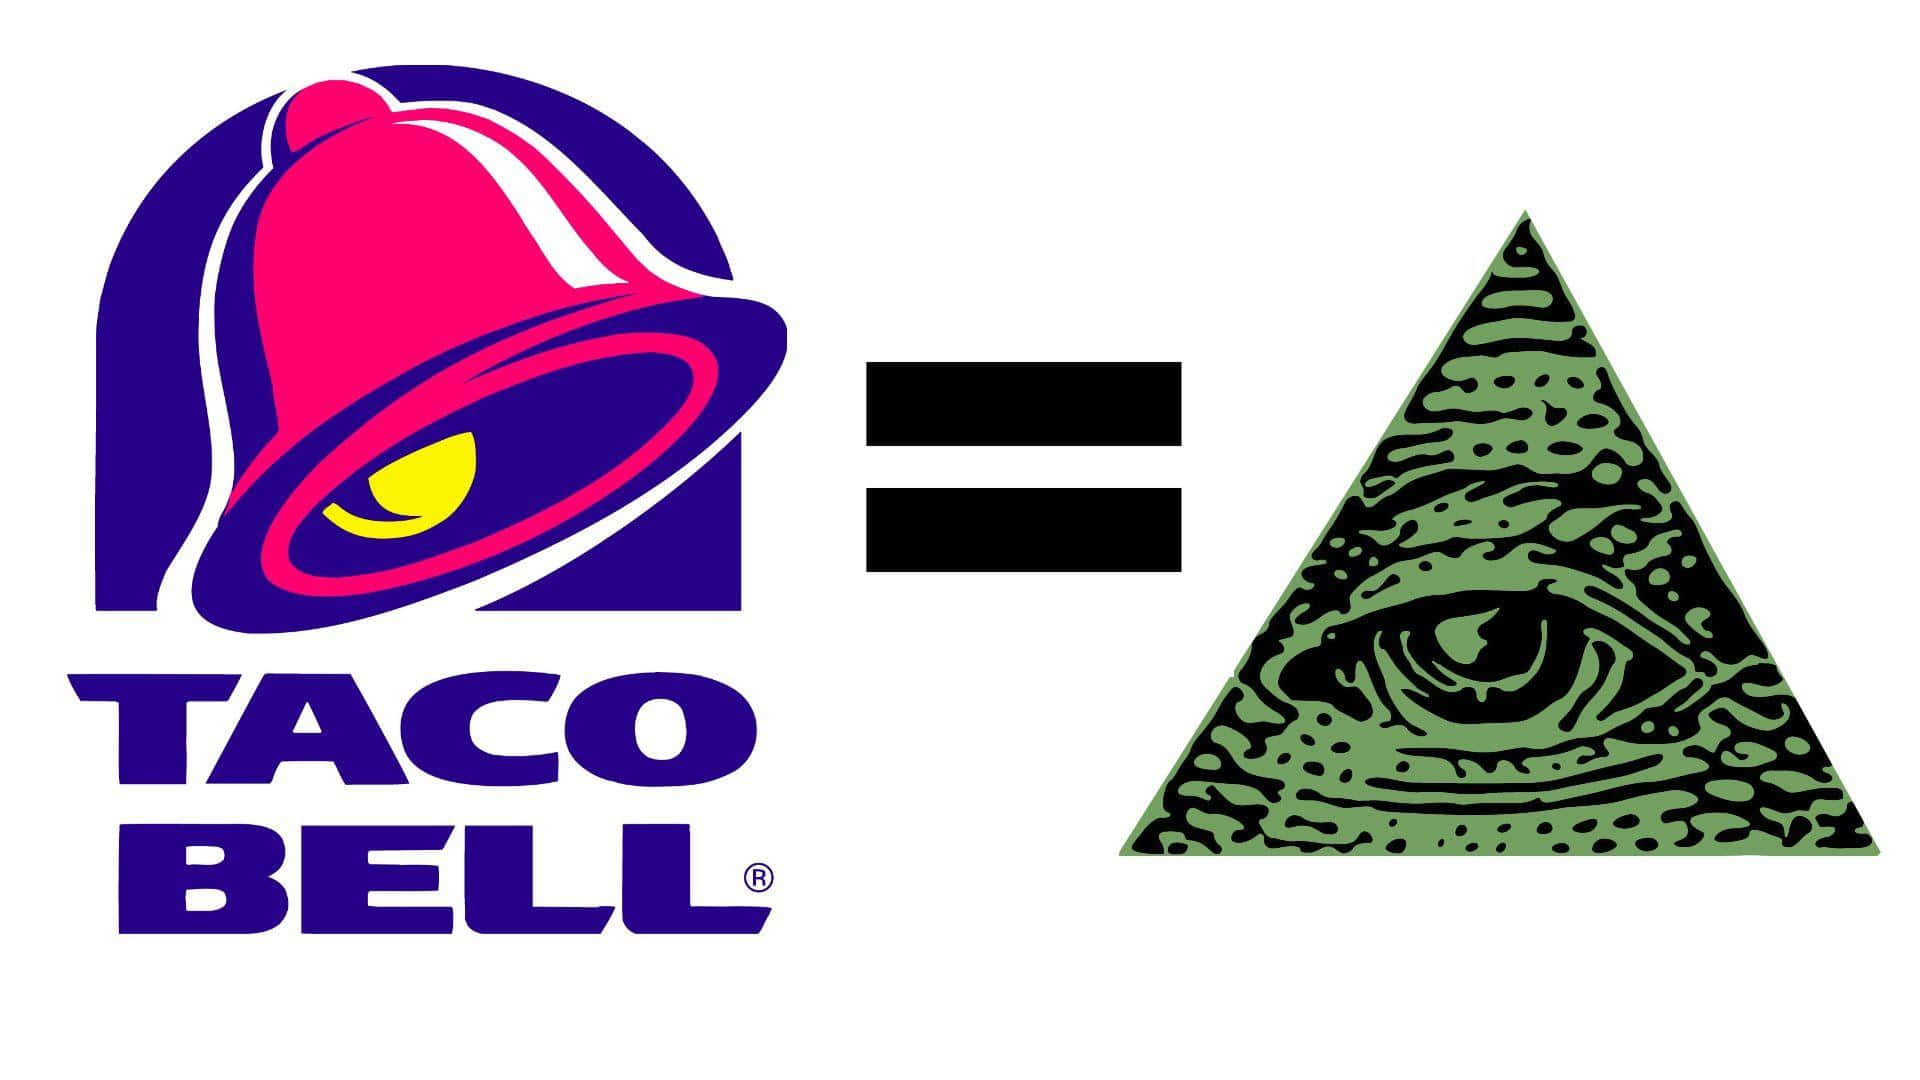 Satisfy Your Cravings With Delicious Mexican-Inspired Food From Taco Bell!